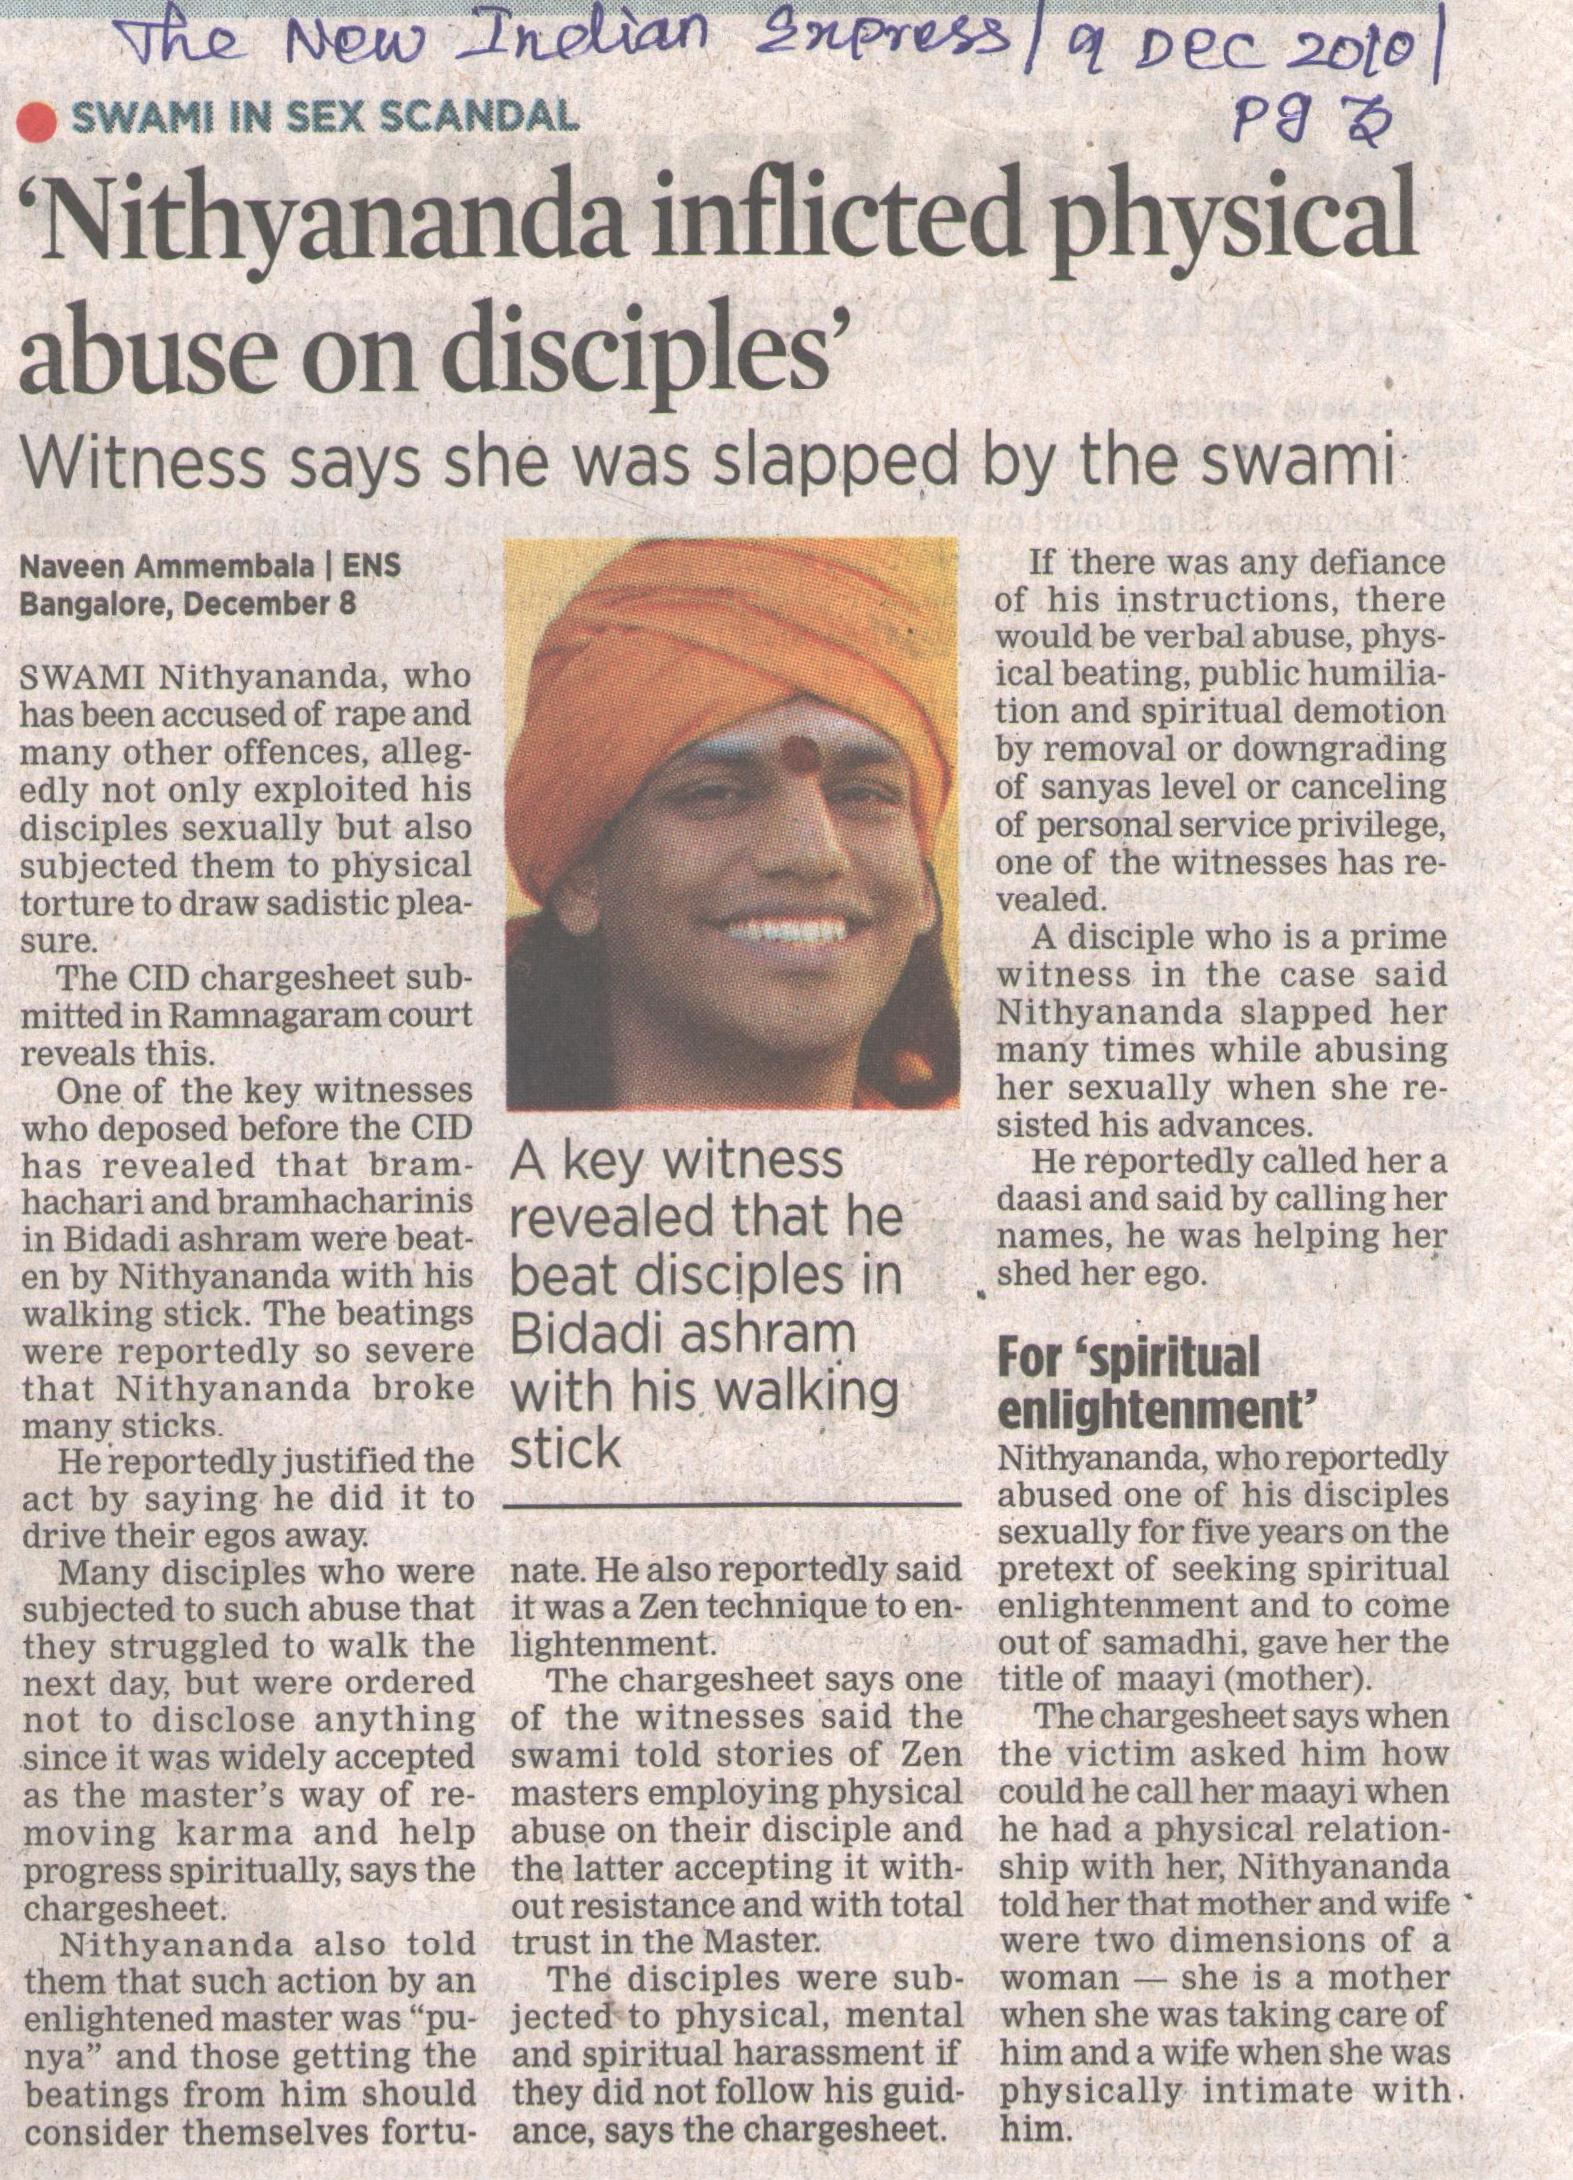 9 Dec 2010_Nithyananda inflicted physical abuse on disciples